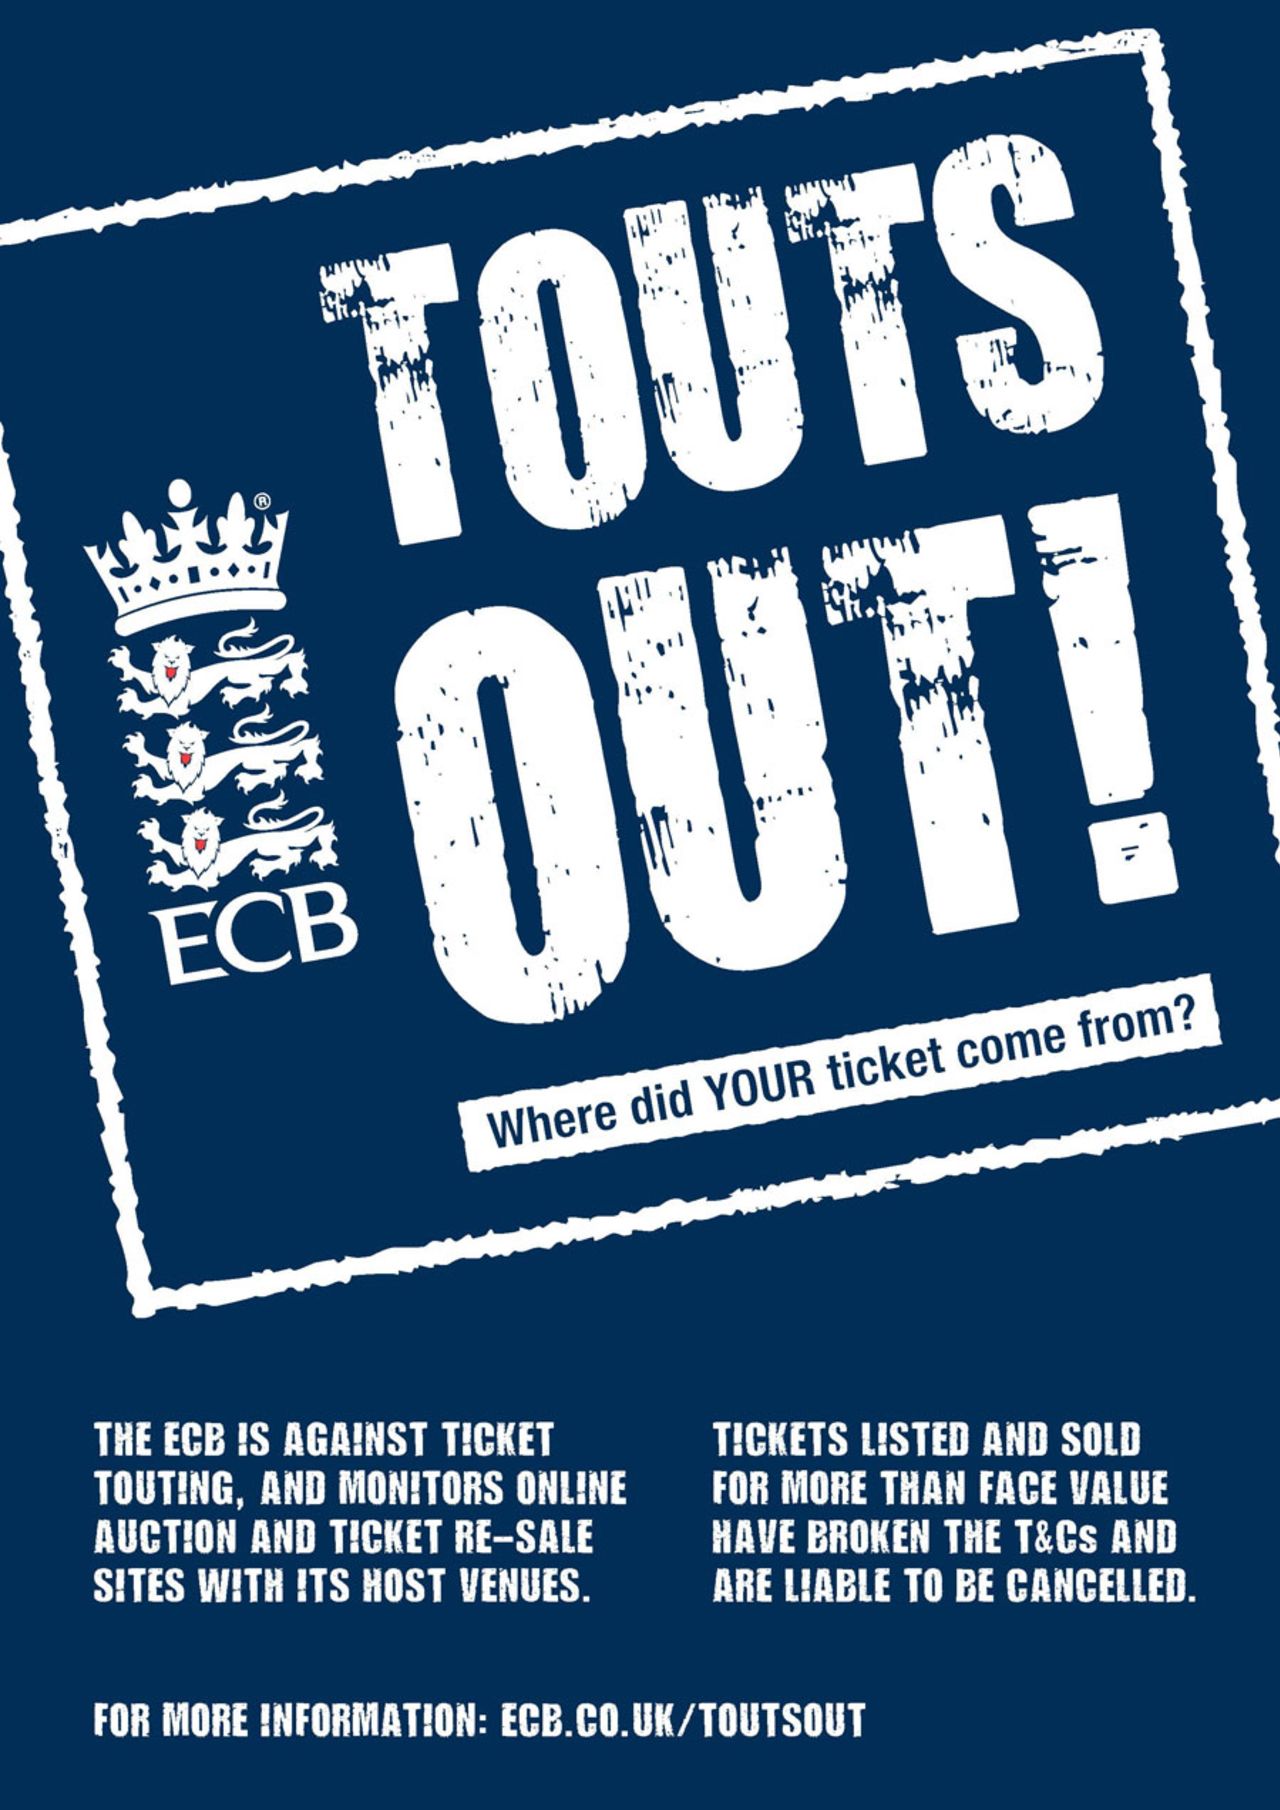 The ECB's anti-touting poster ahead of the Ashes, January 9, 2013